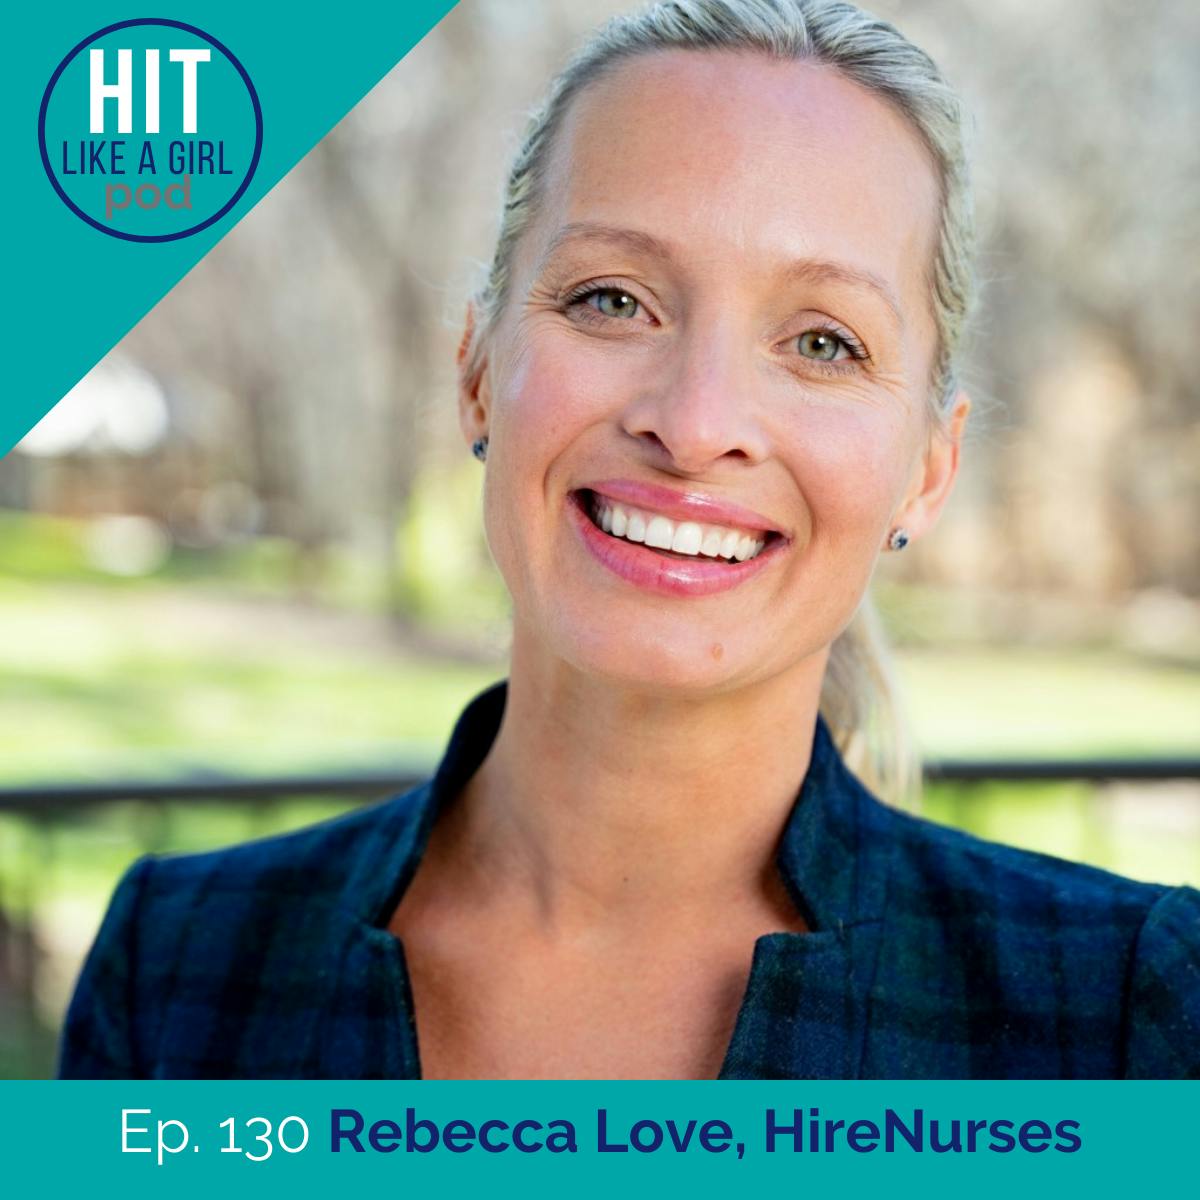 Rebecca Love is a Prominent Advocate for Nurses